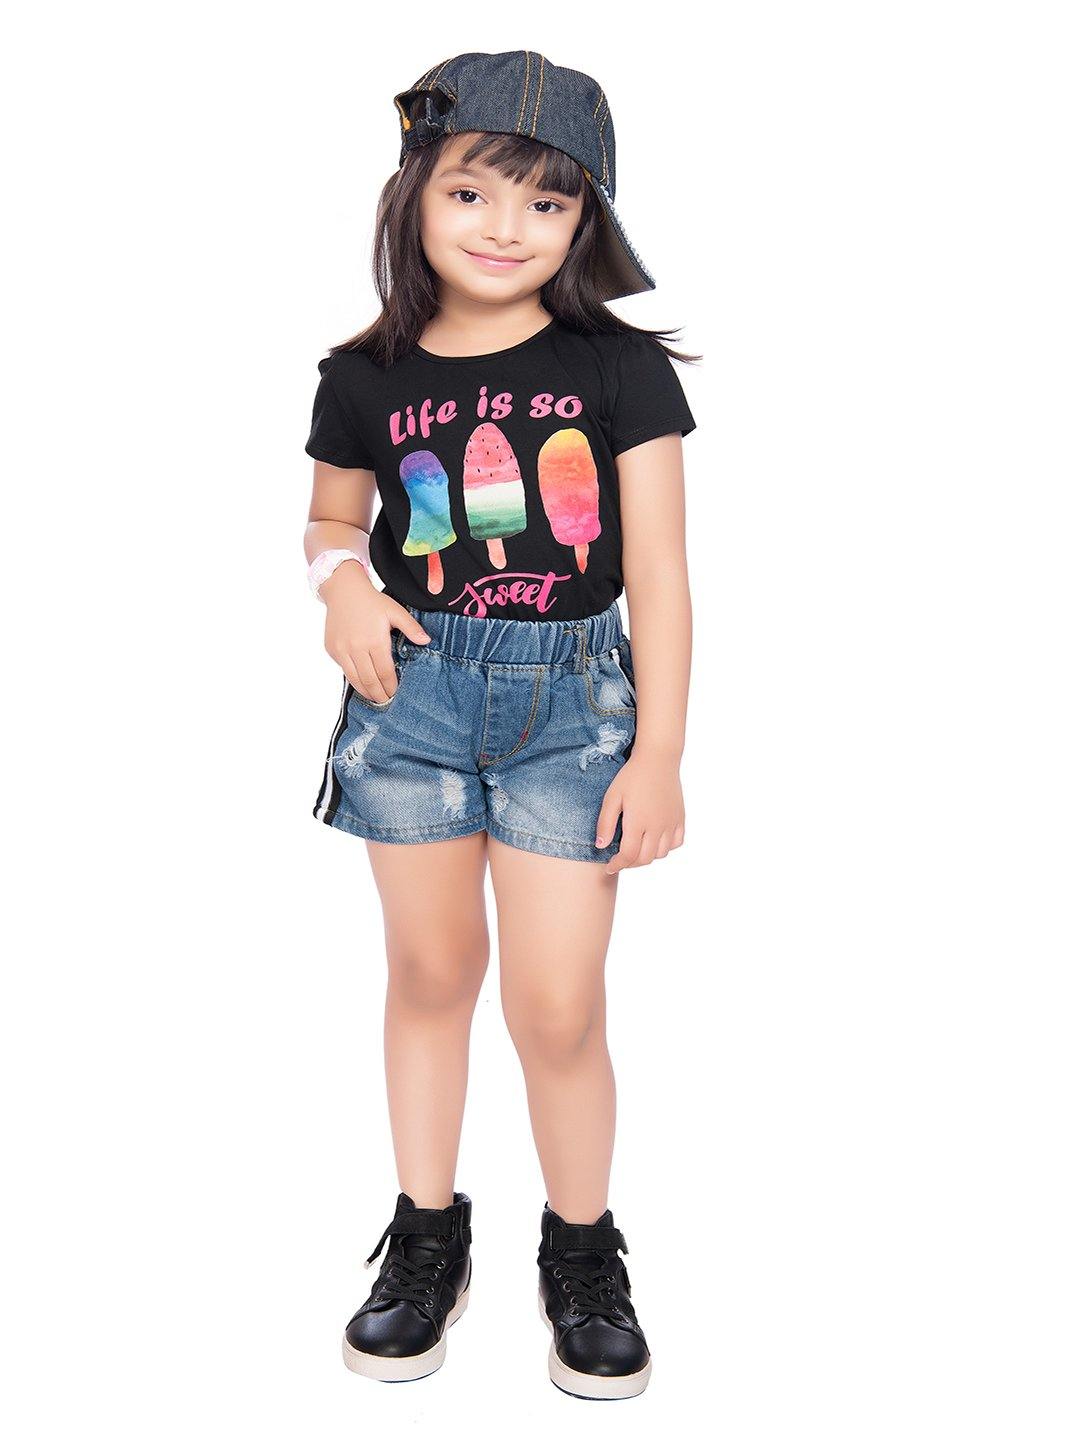 Tiny Baby Black Colored Top - T-108 Black - TINY BABY INDIA shop.tinybaby.in